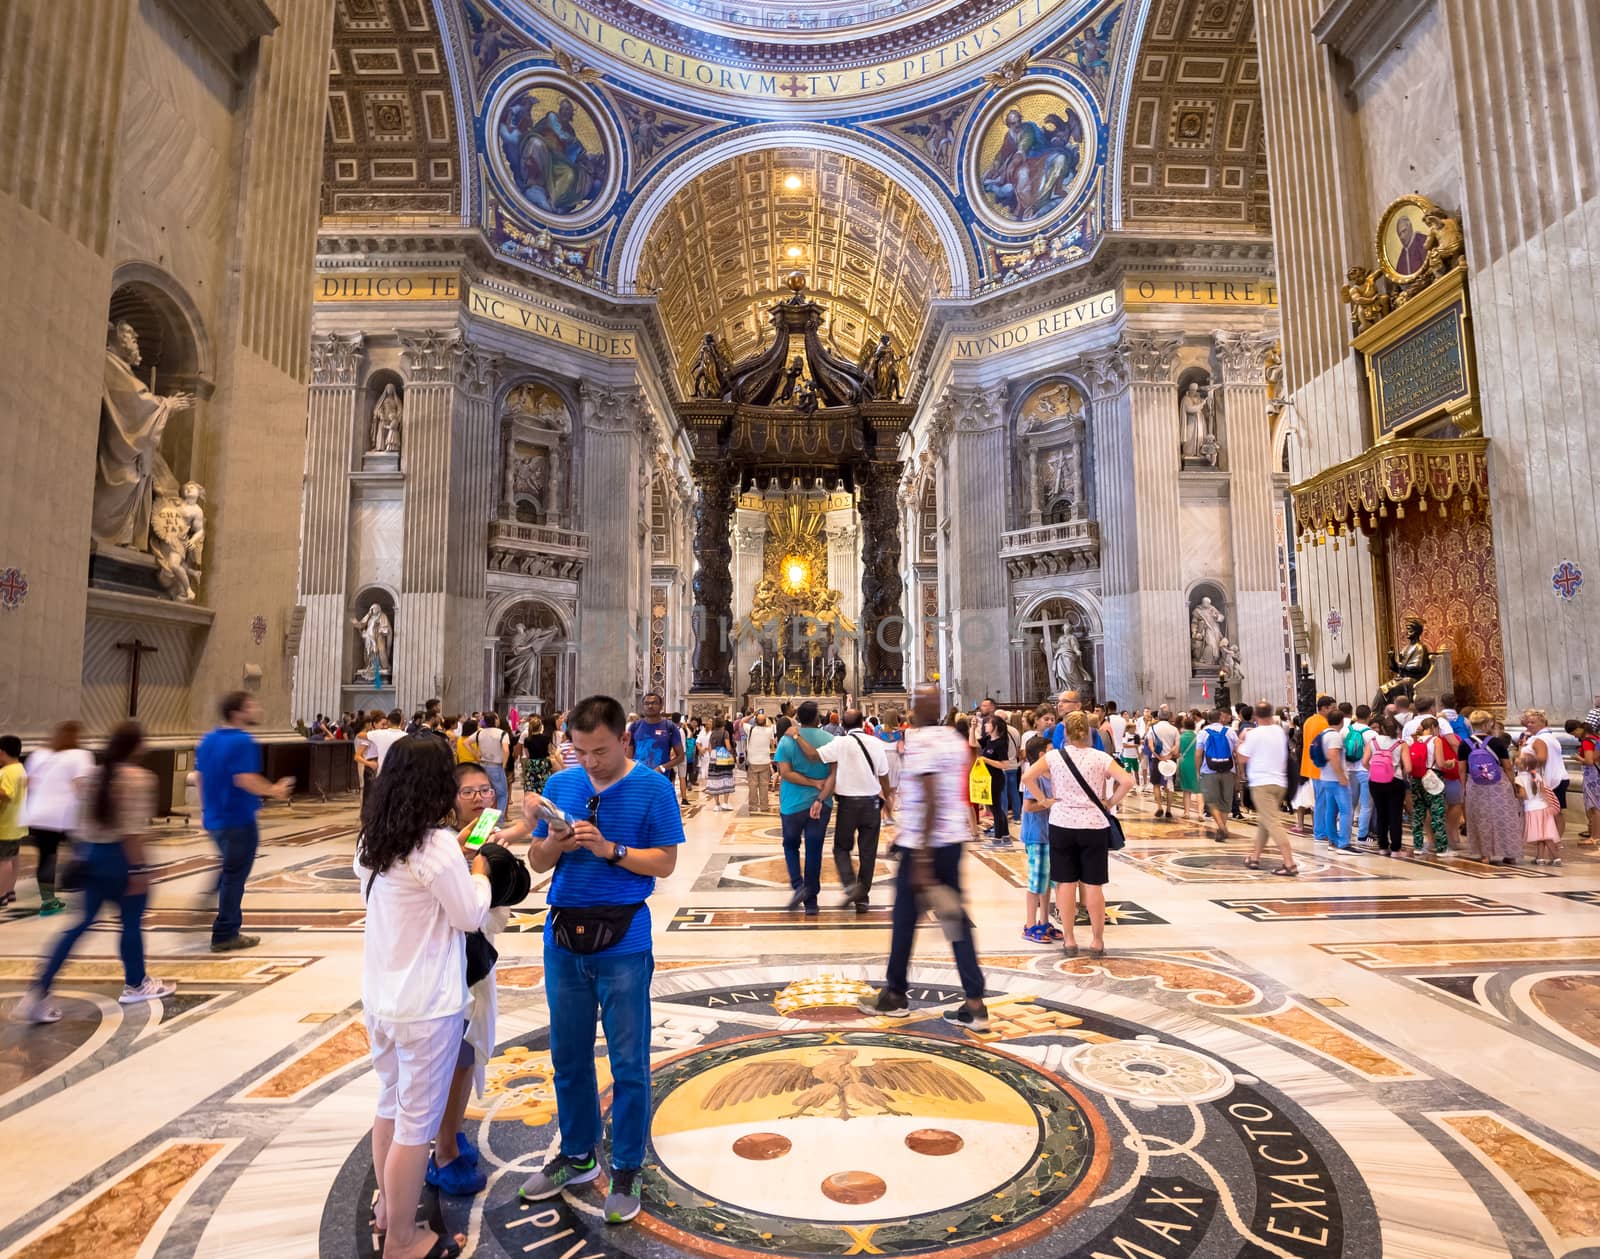 Over-tourism in Saint Peter Basilica, Vatican State by Perseomedusa